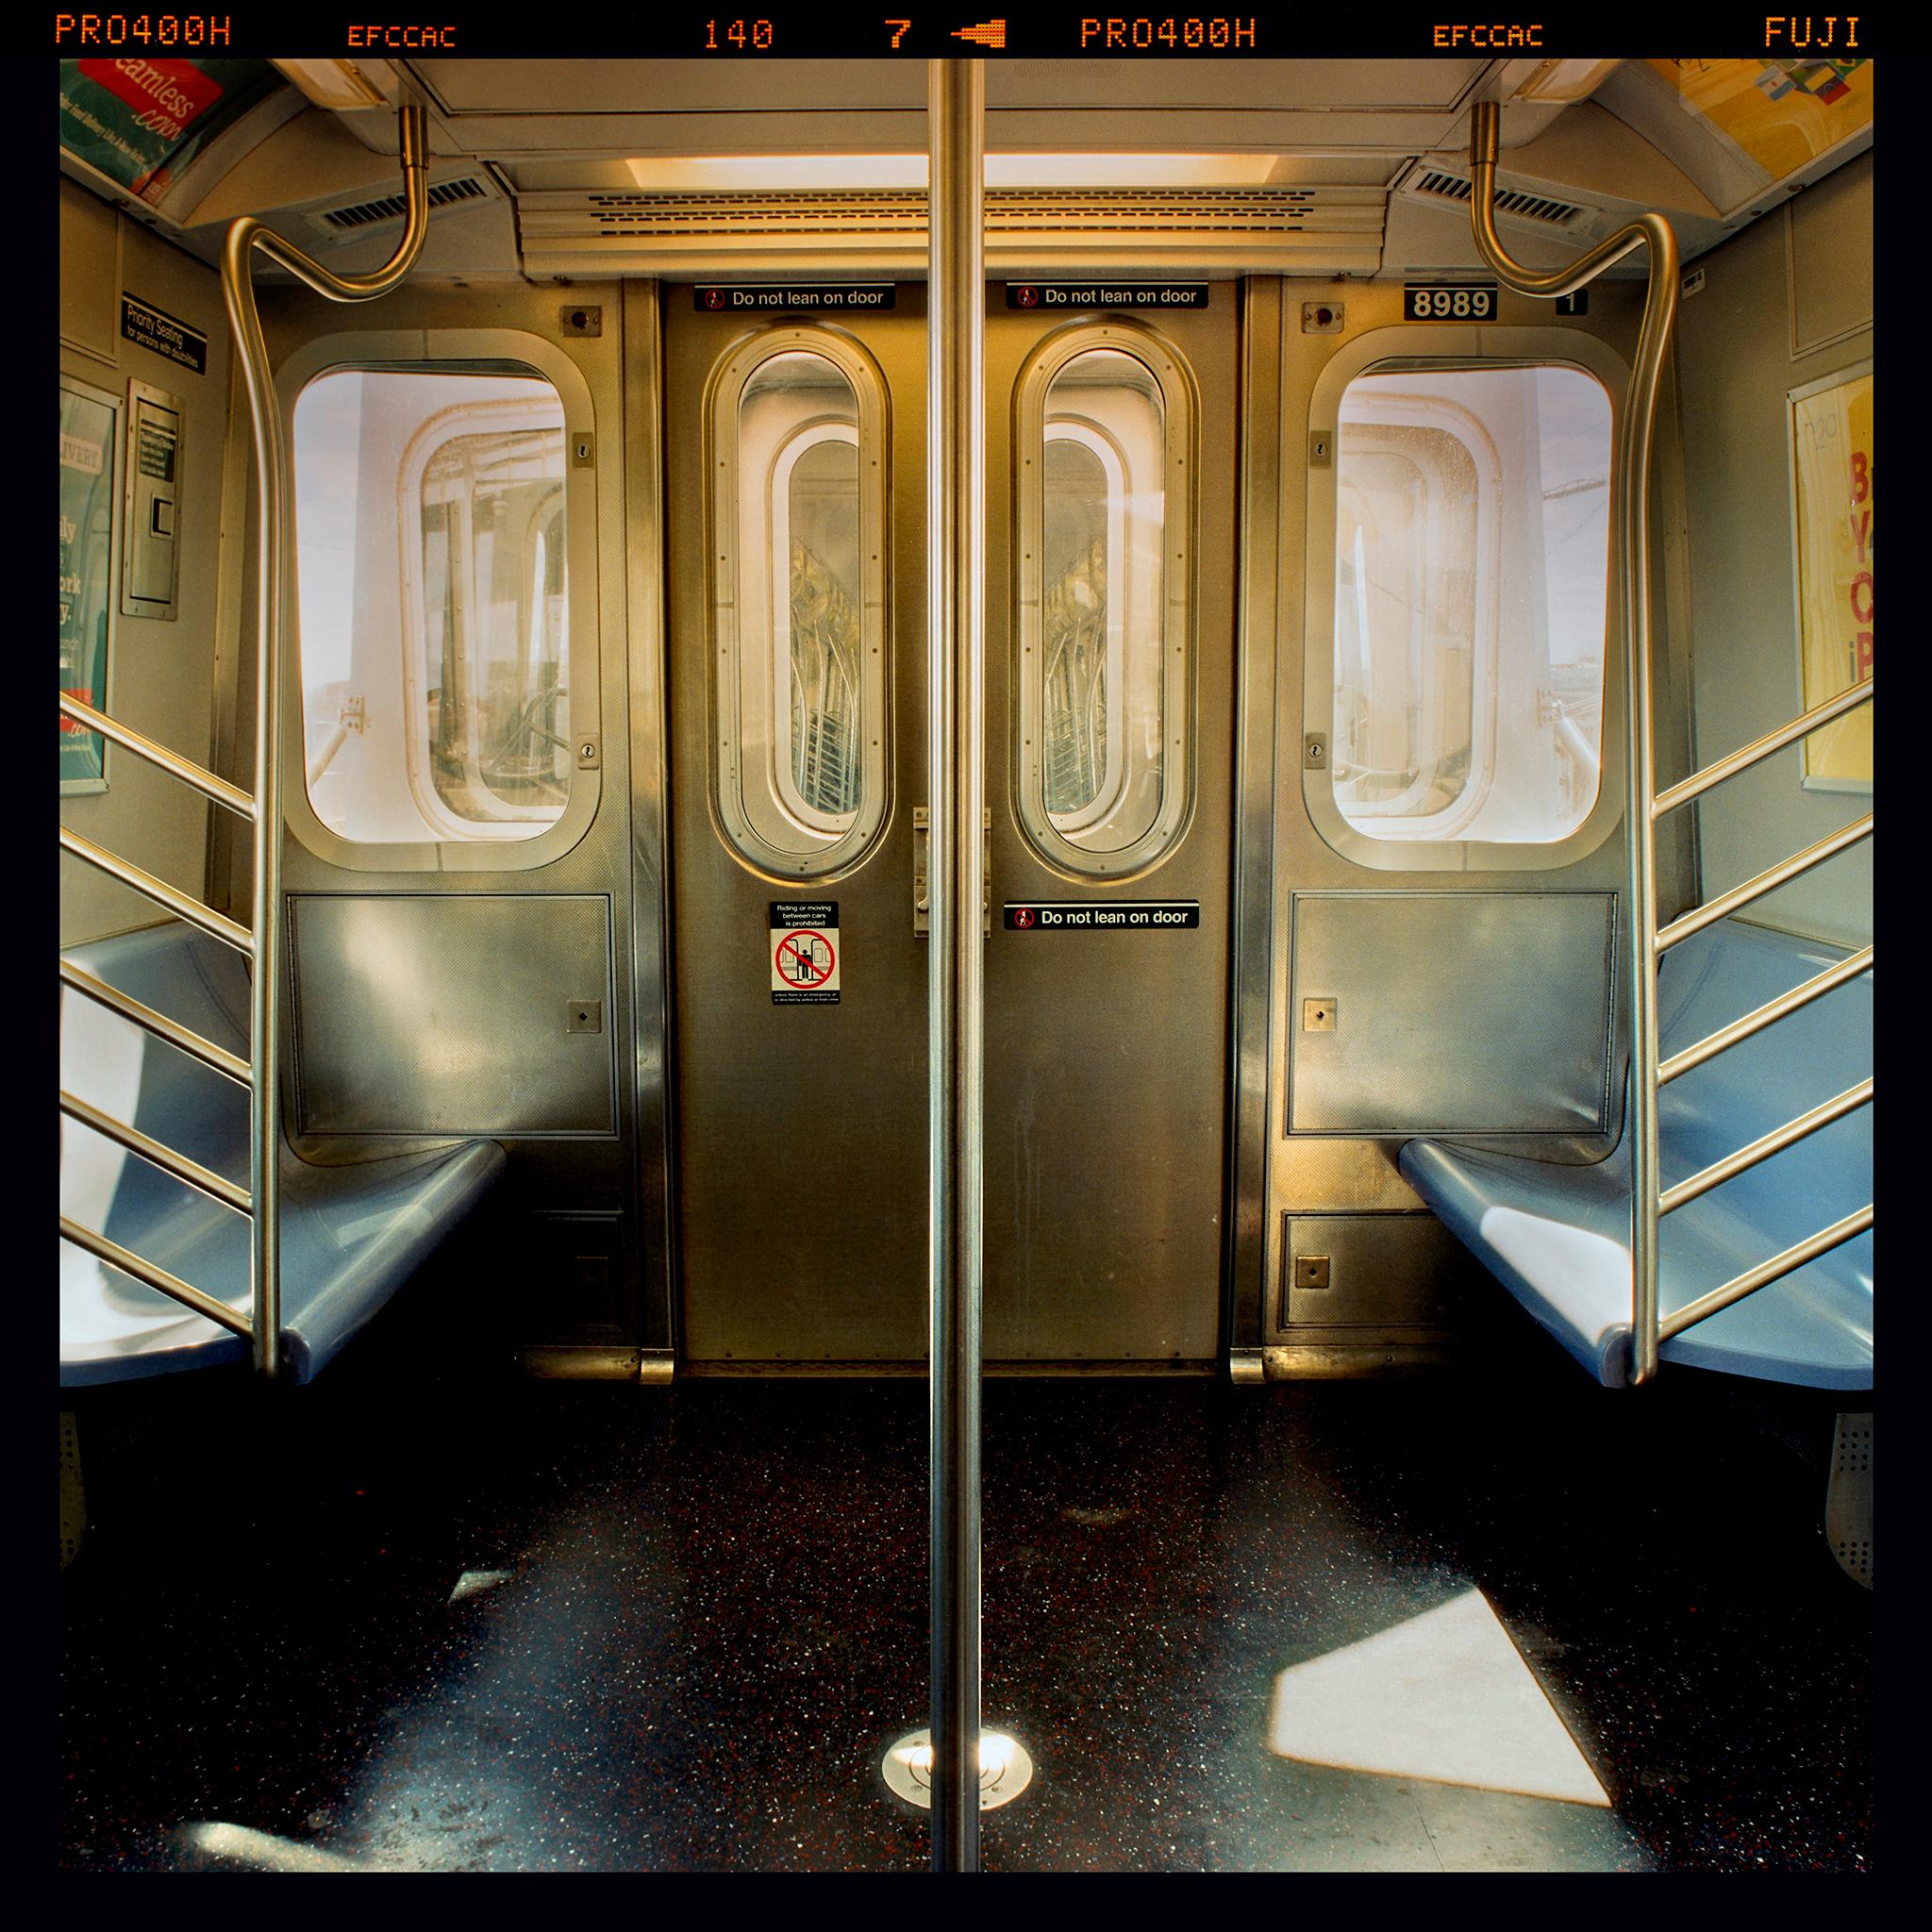 New York City Subway Car interior photograph by Richard Heeps. This atmospheric photograph of a New York City Subway Car captures the cinematic essence of riding the subway. The perspective of the pole in the middle gives the viewer a sense of being